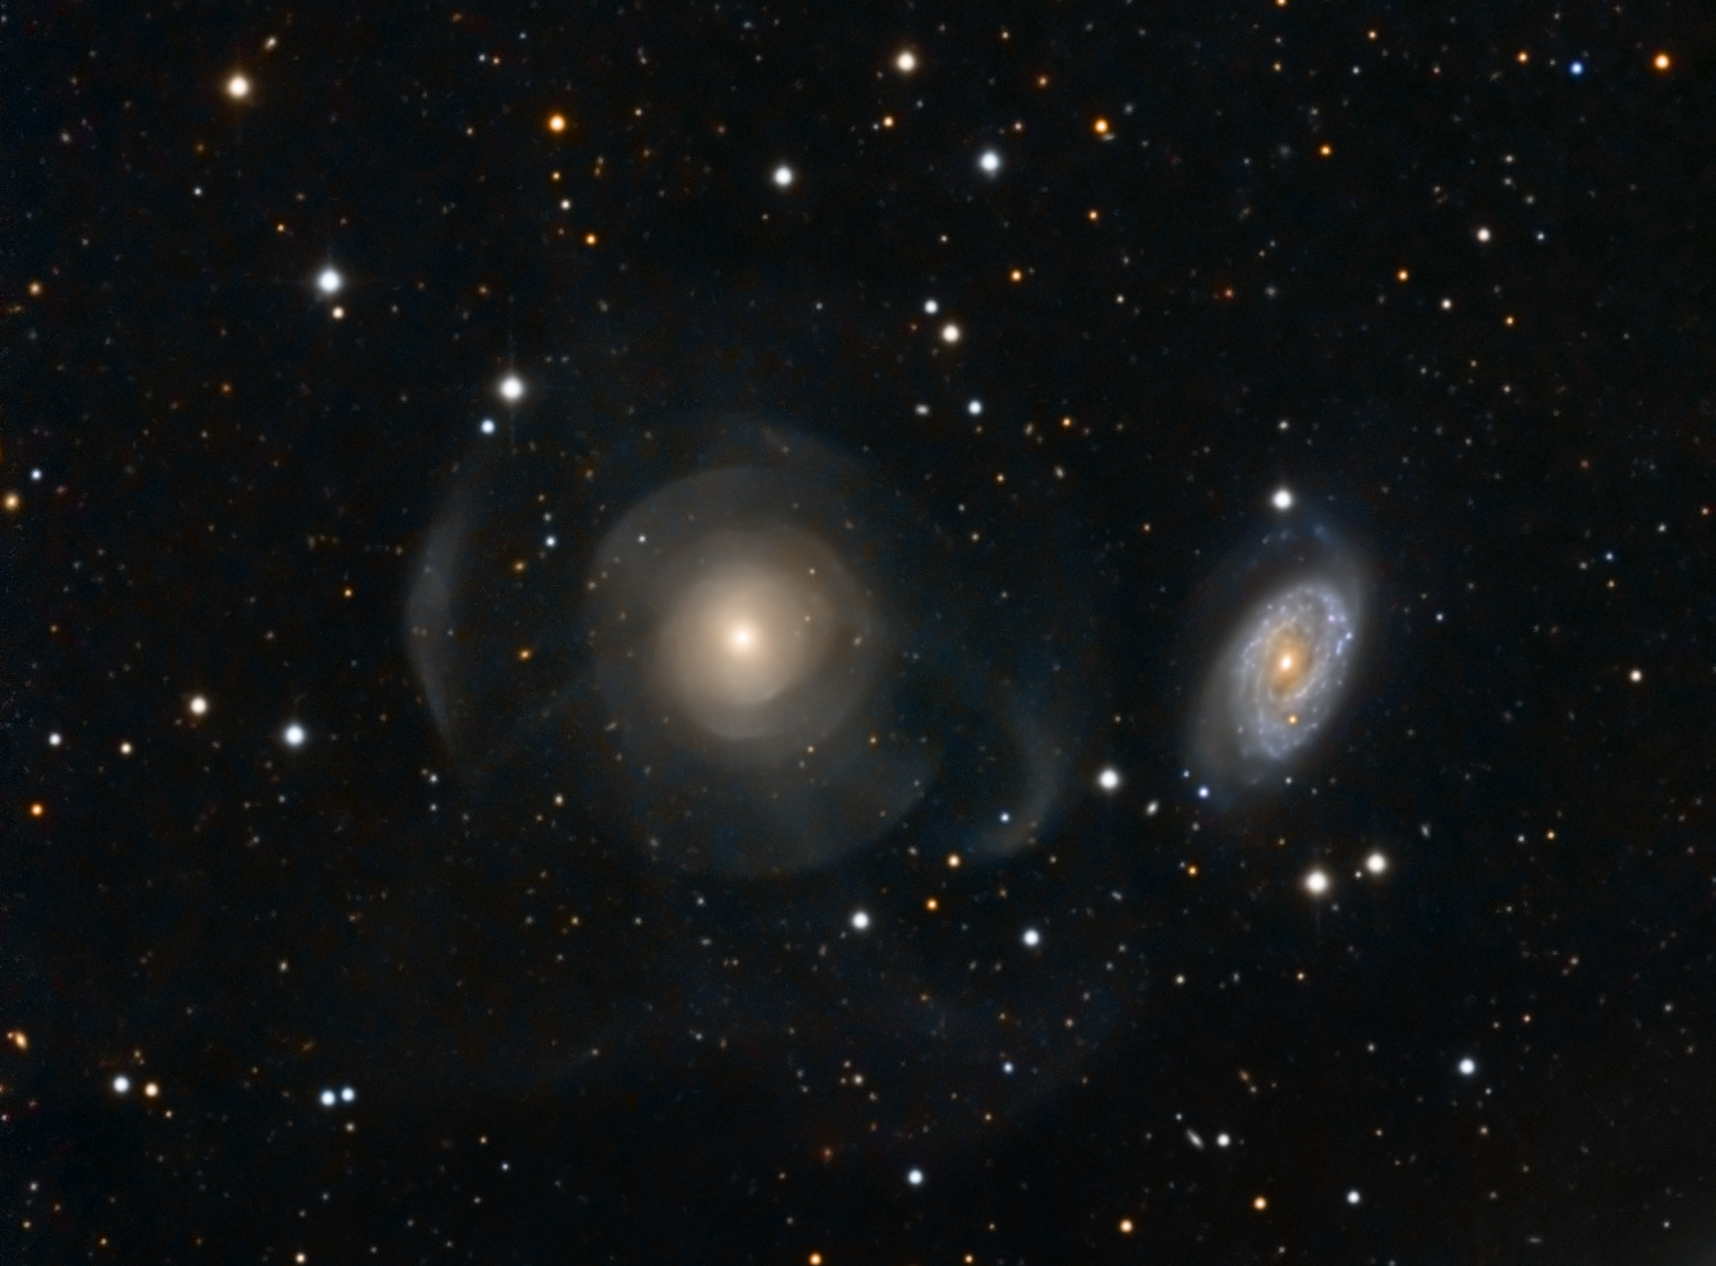 Shell Galaxy in Pisces